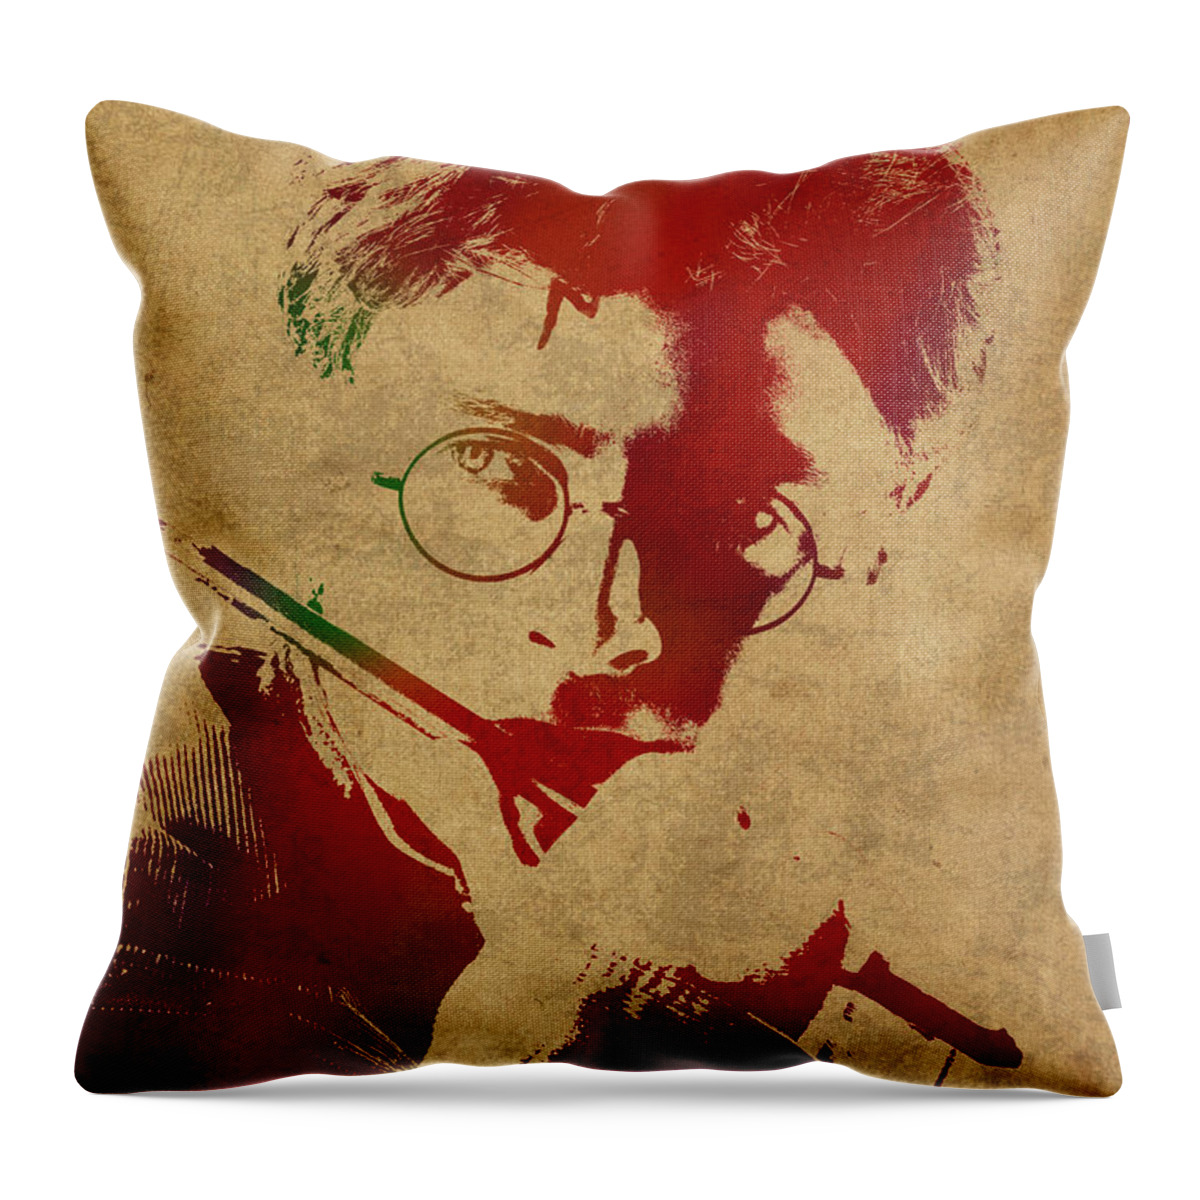 Harry Potter Official Pillows